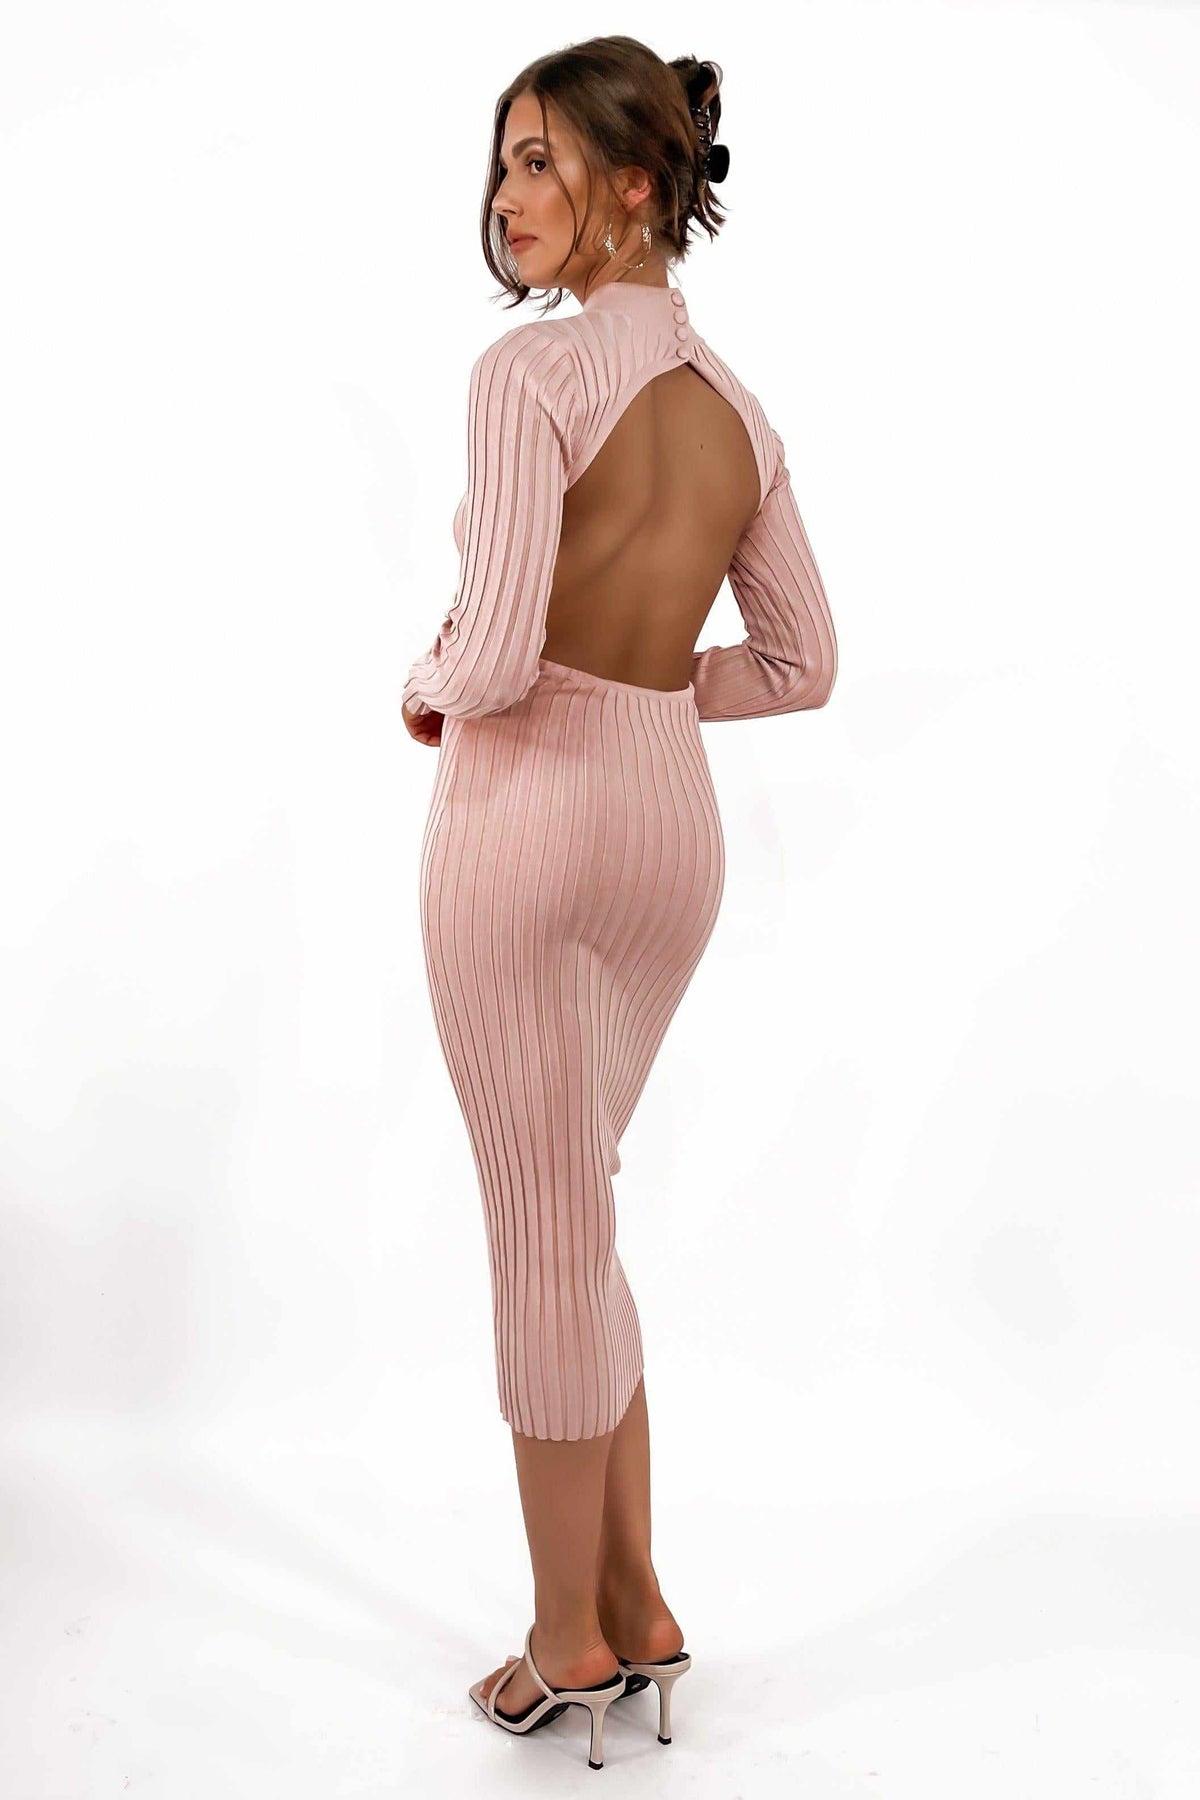 Leigh Dress, DRESS, DRESSES, HIGH NECK, LONG SLEEVE, MIDI DRESS, NYLON, OPEN BACK, PINK, RIBBED, SALE, VISCOSE, Leigh Dress only $69.00 @ MISHKAH ONLINE FASHION BOUTIQUE, Shop The Latest Women&#39;s Dresses - Our New Leigh Dress is only $69.00, @ MISHKAH ONLINE FASHION BOUTIQUE-MISHKAH